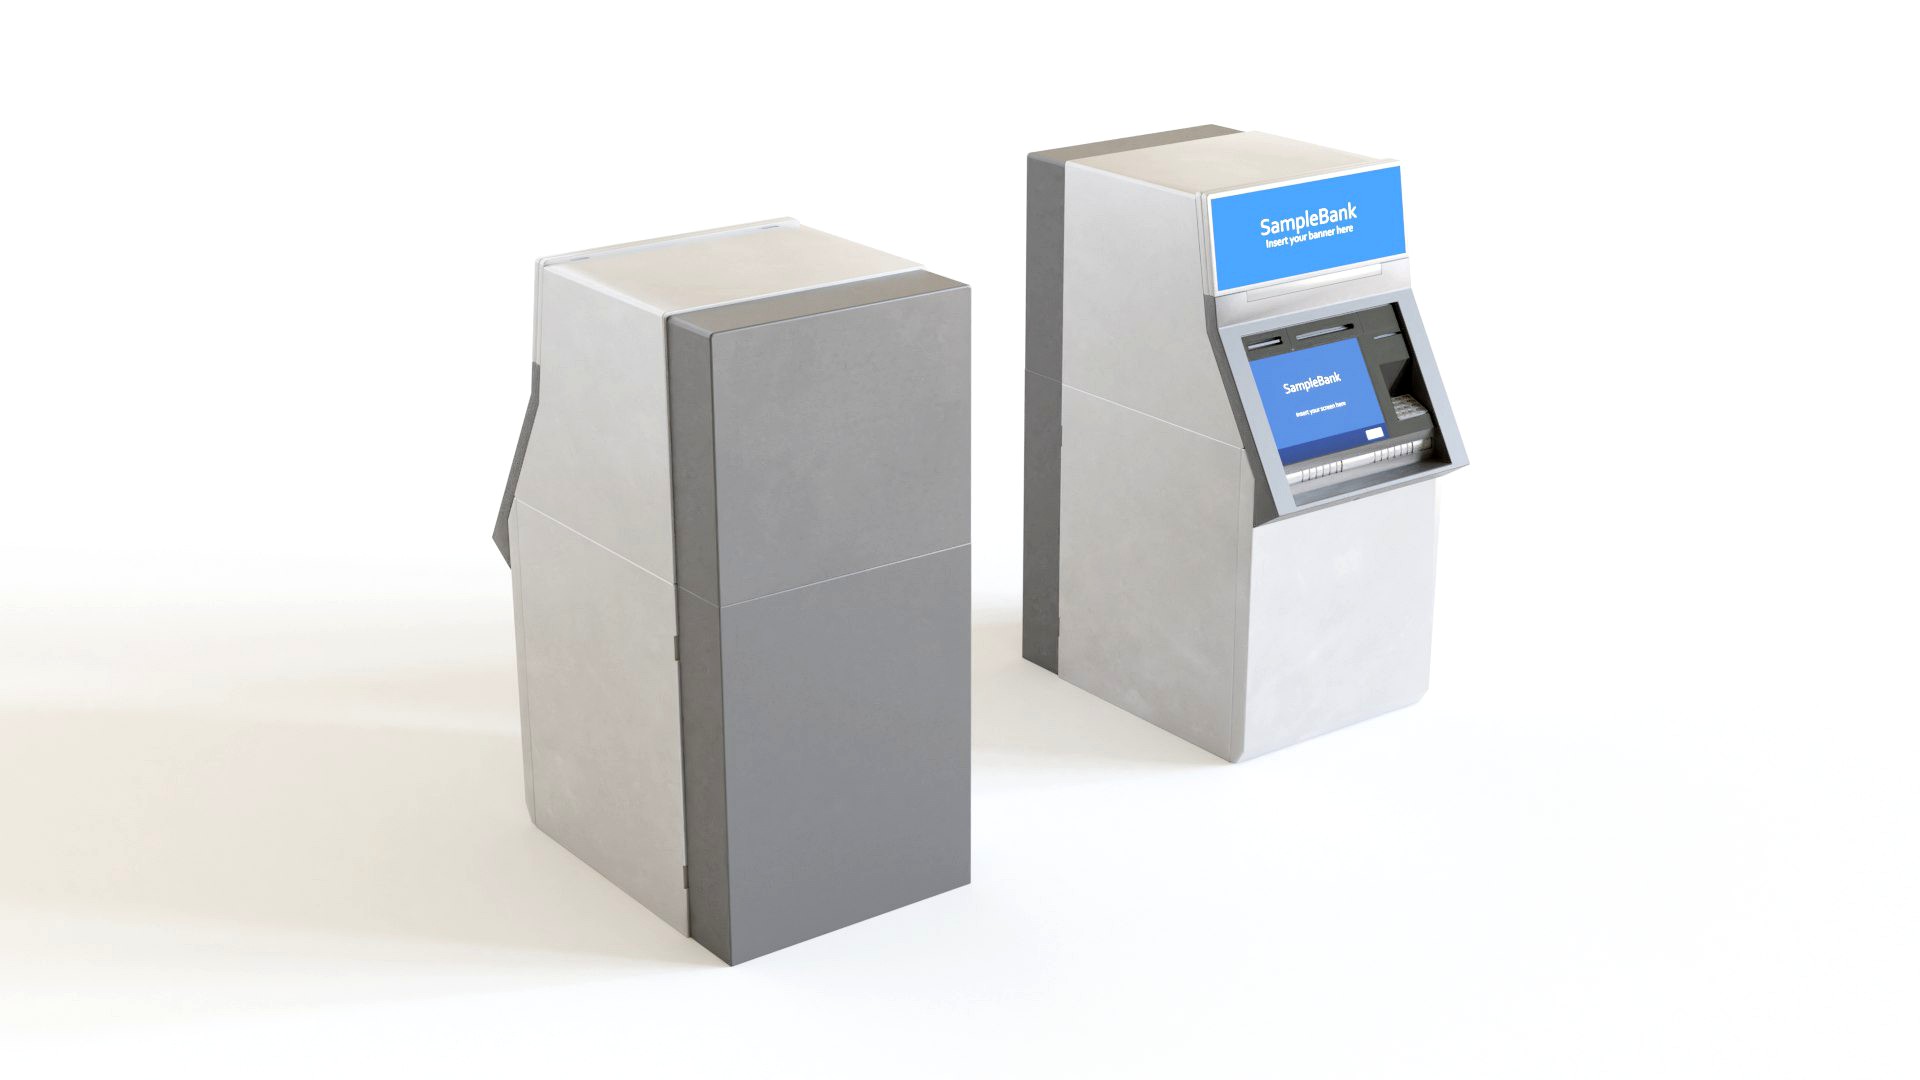 ATM - automated teller machine(1)